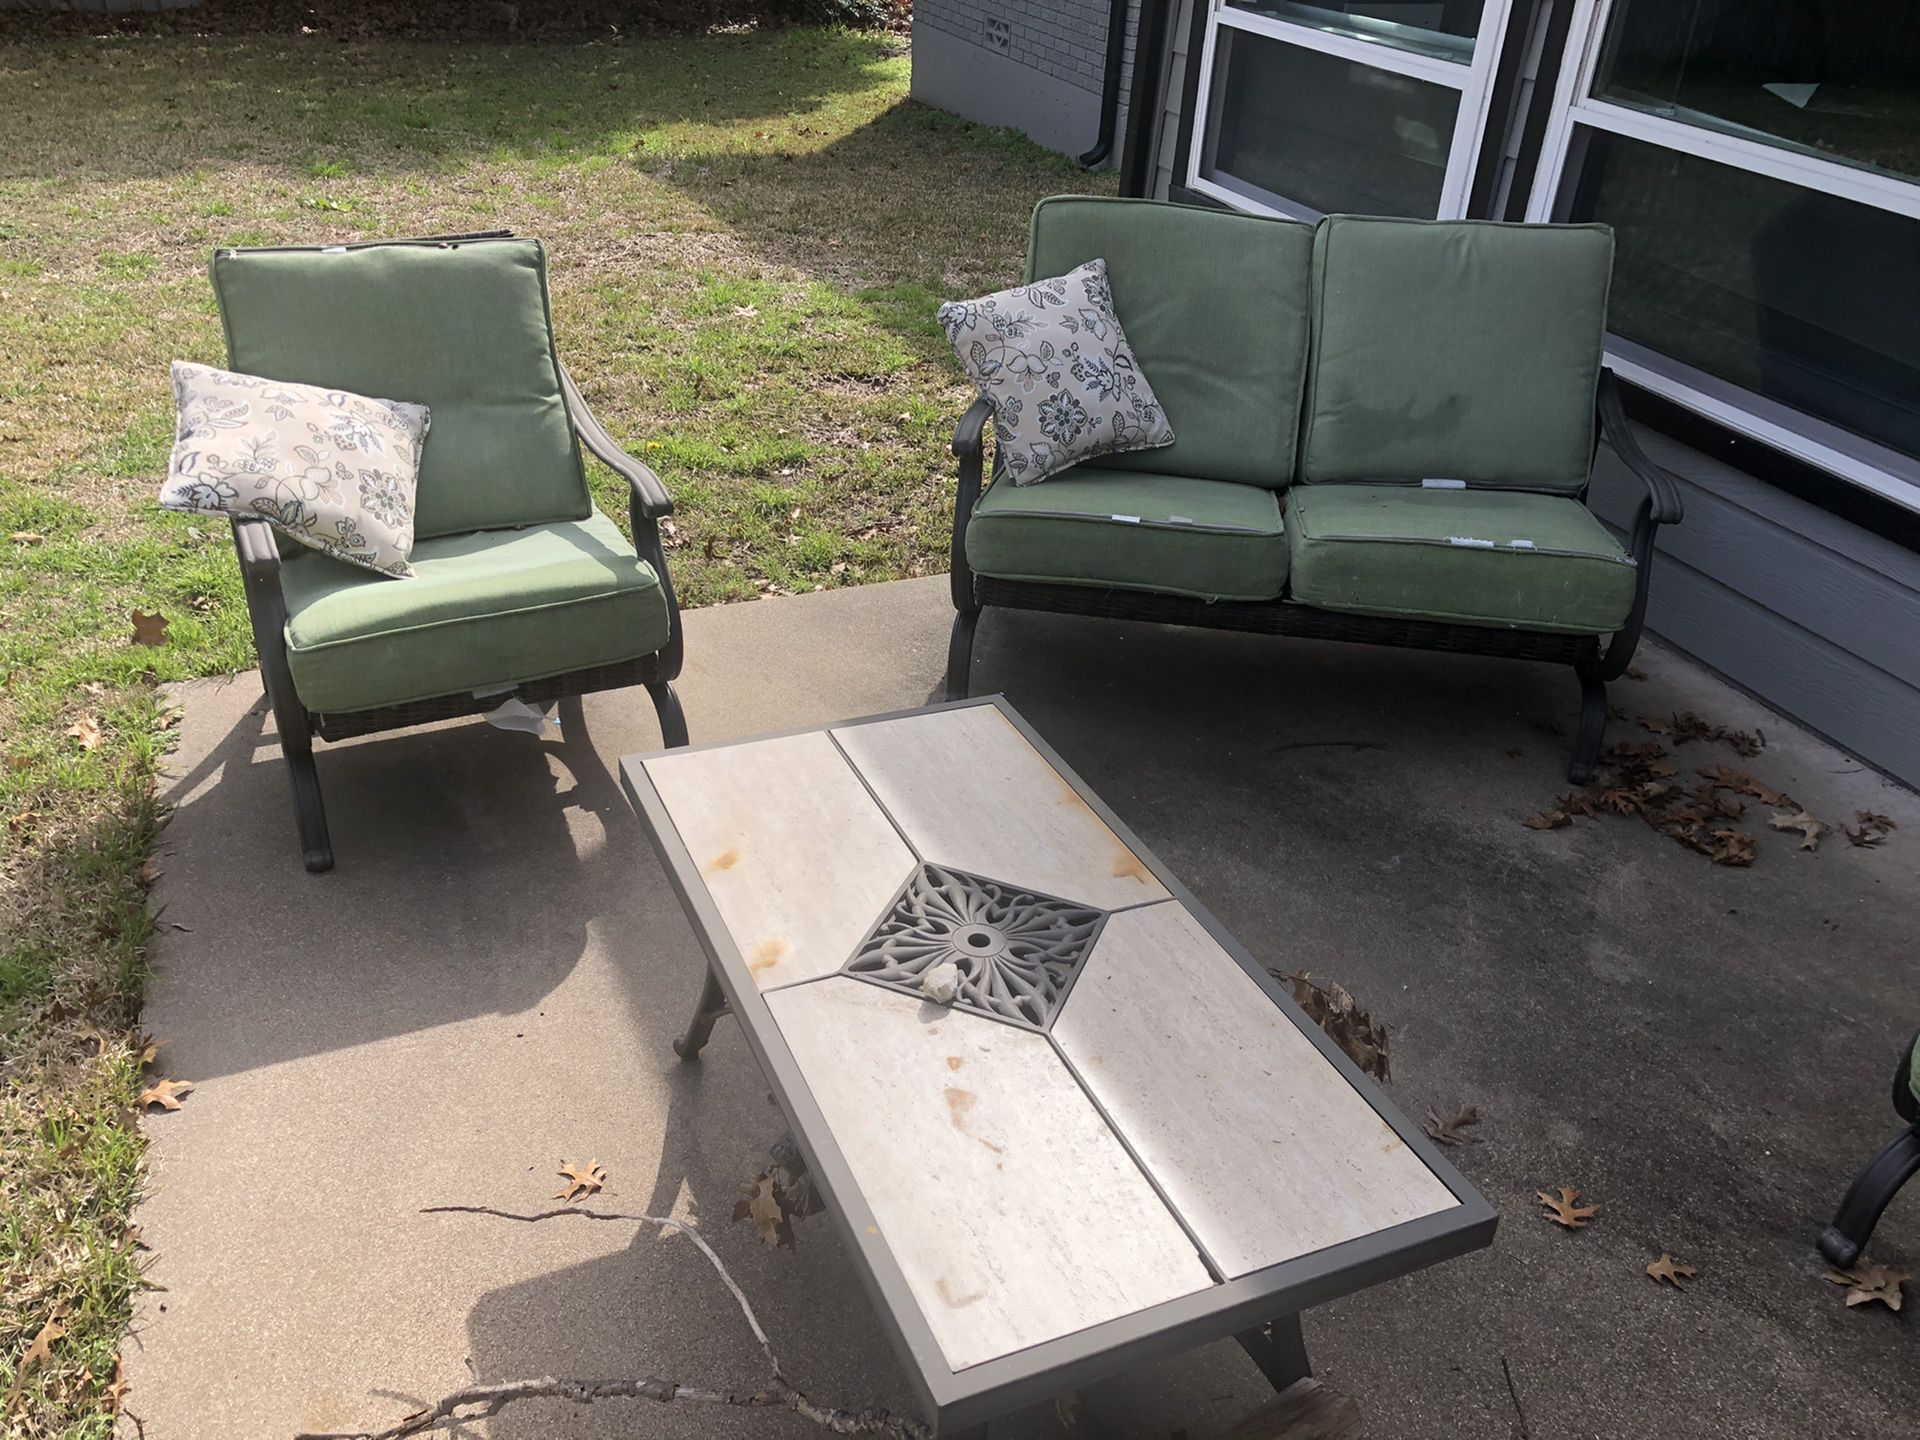 Patio set CHEAP - $120 for 2 chairs, 1 bench seat, and table